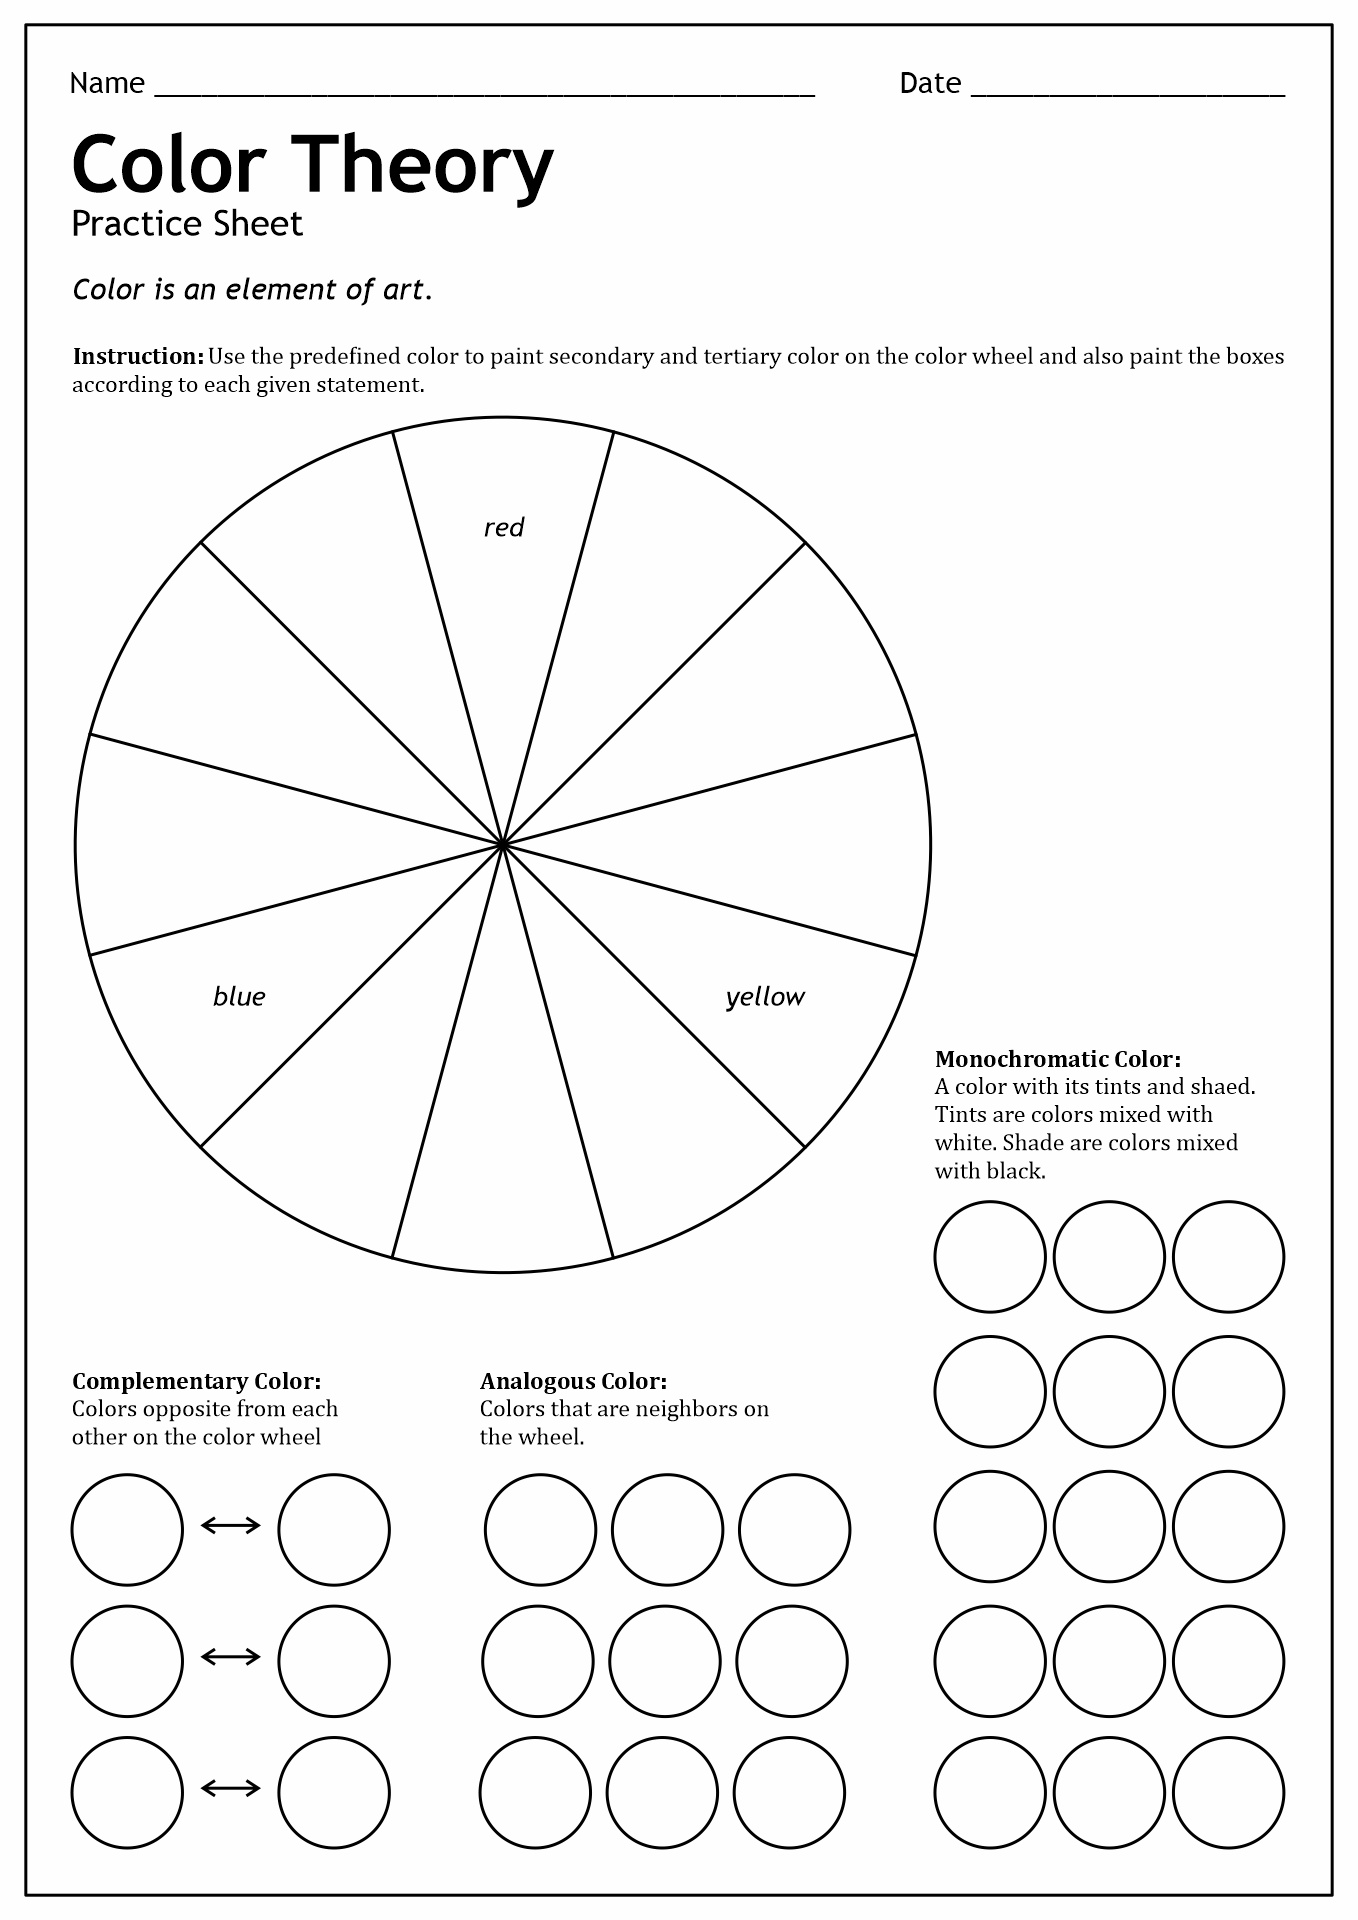 Color Theory Art Worksheets Image